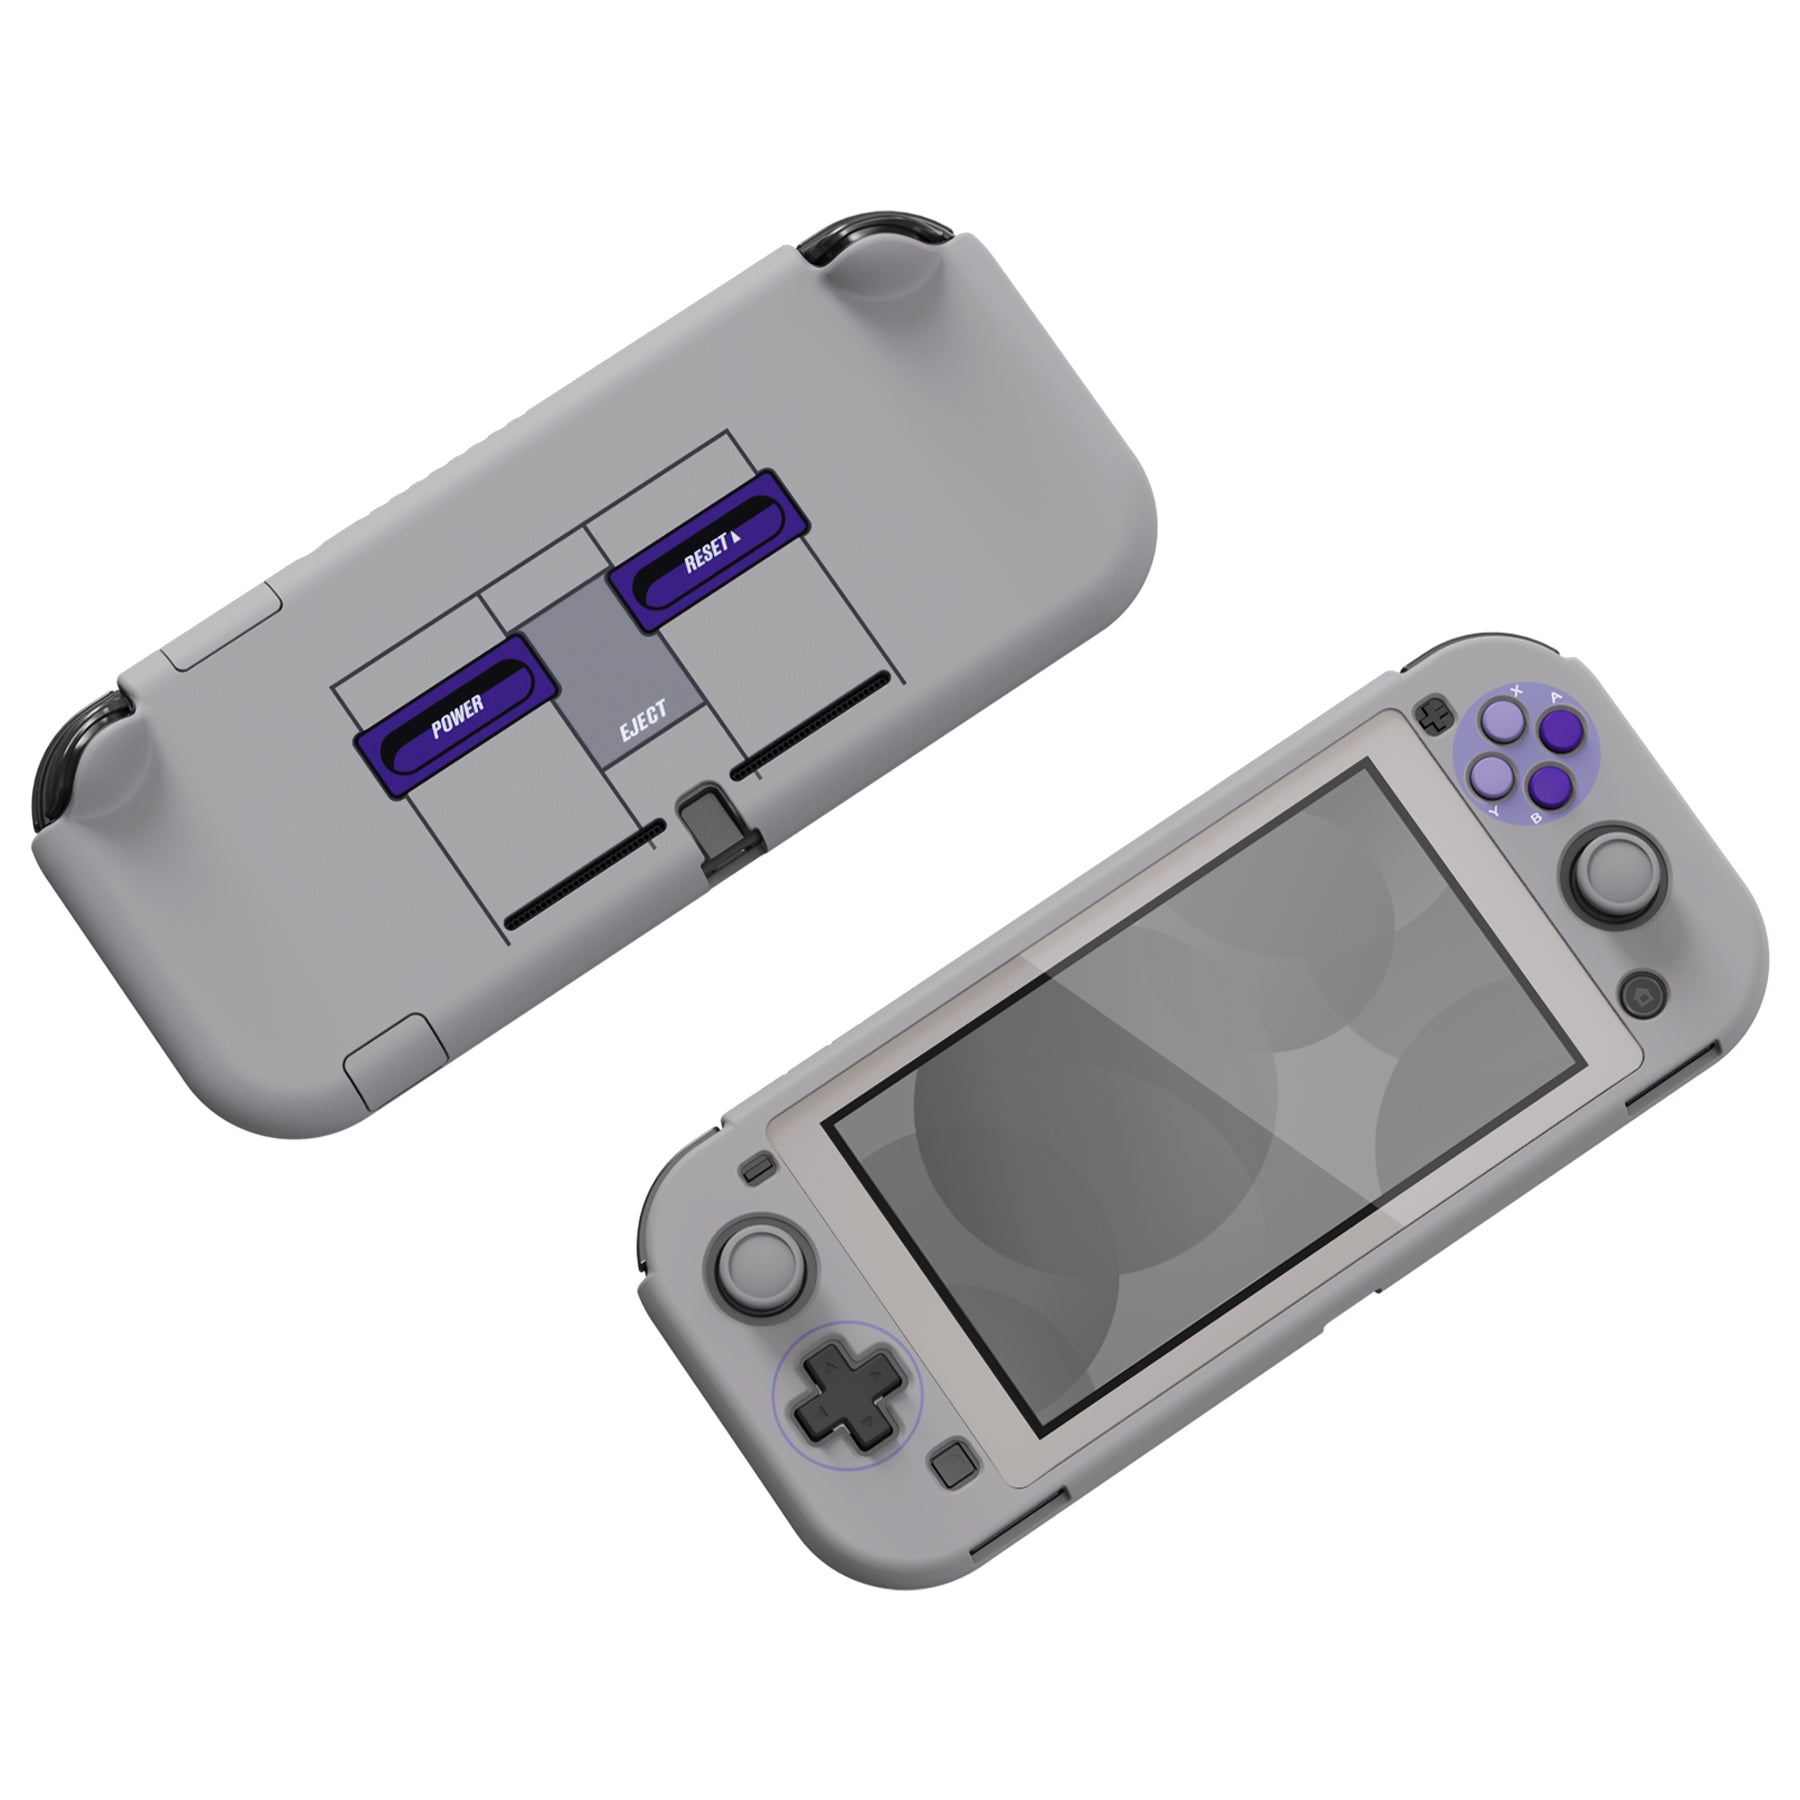 PlayVital Classics SNES Style Protective Grip Case for NS Switch Lite, Hard Cover for Nintendo Switch Lite - Screen Protector & Thumb Grips & Buttons Caps Stickers Included - YYNLY003 playvital